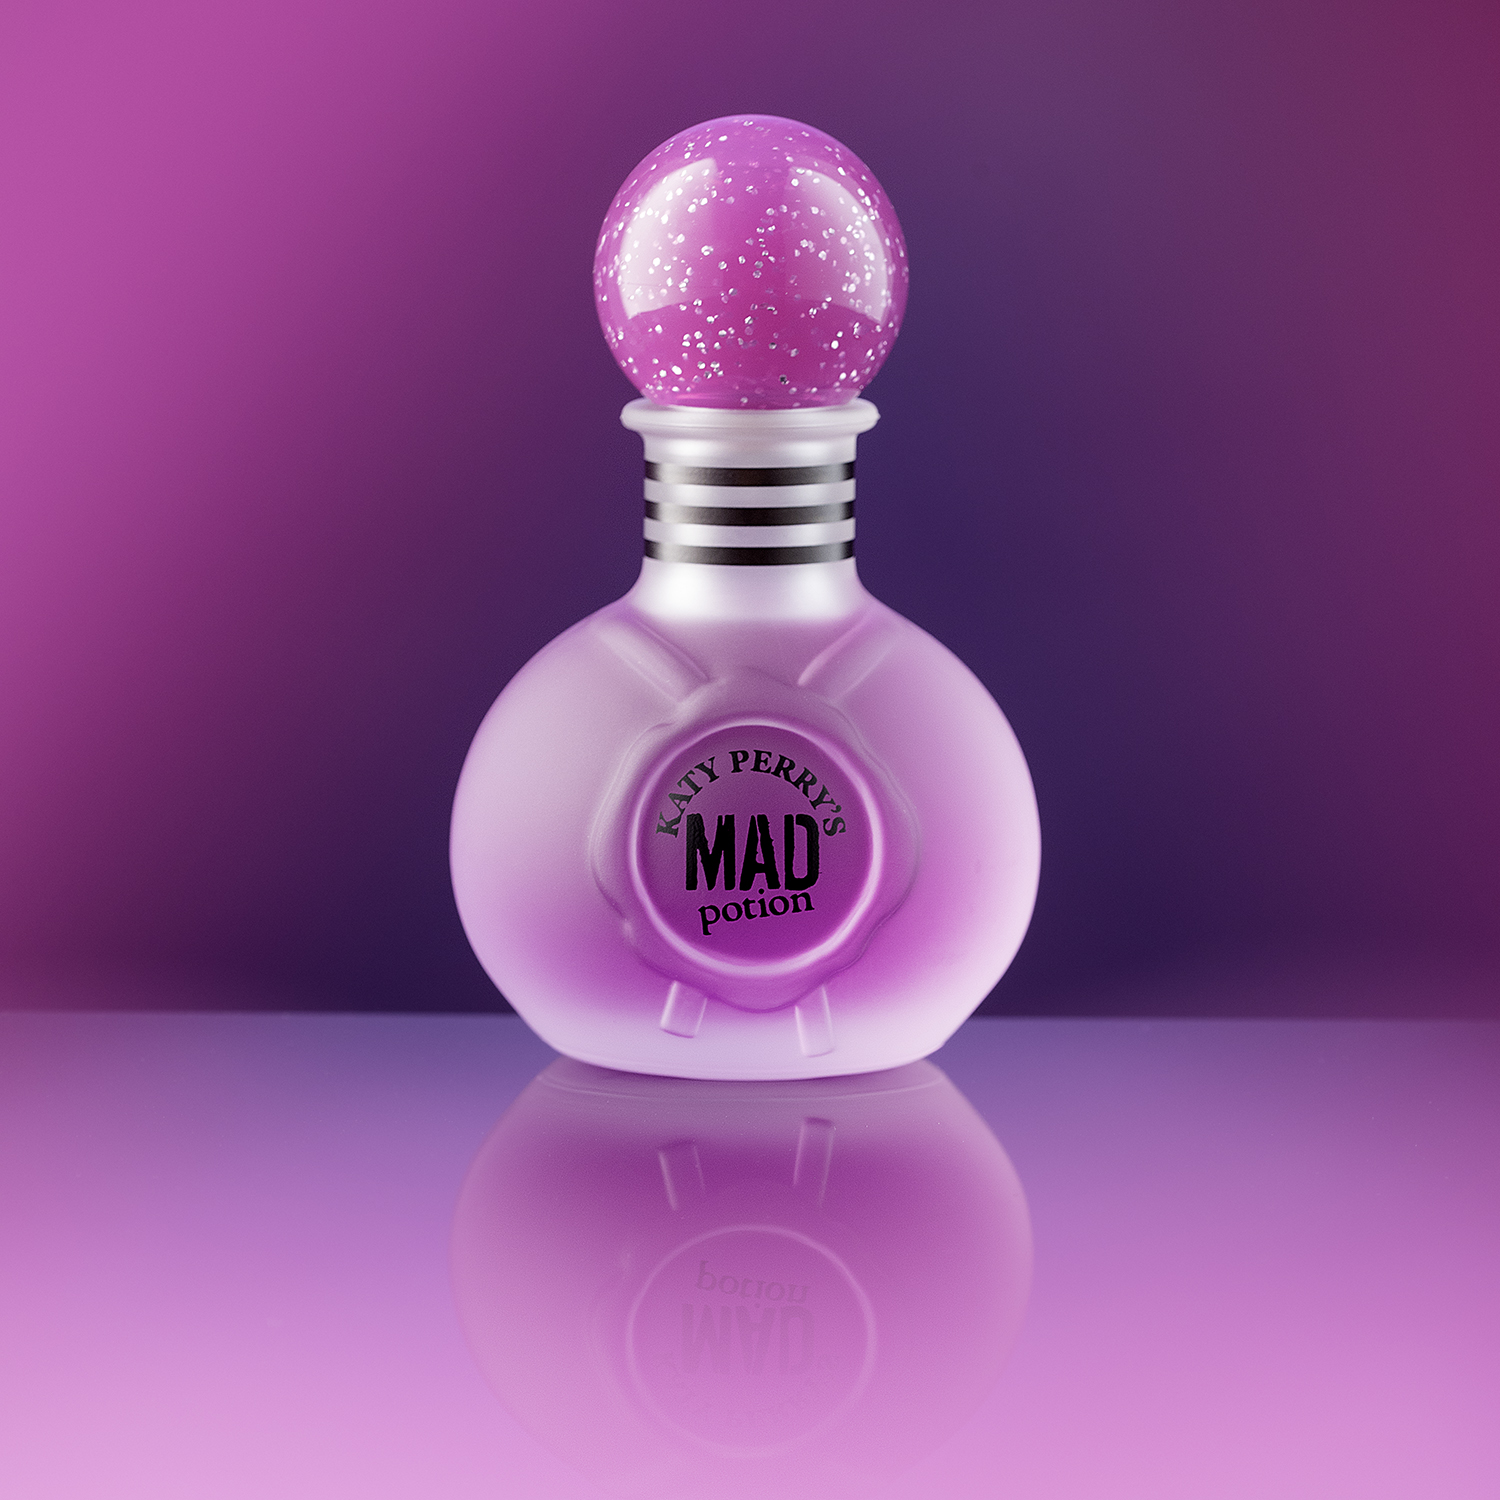 katy-perry's-mad-product-photography.jpg